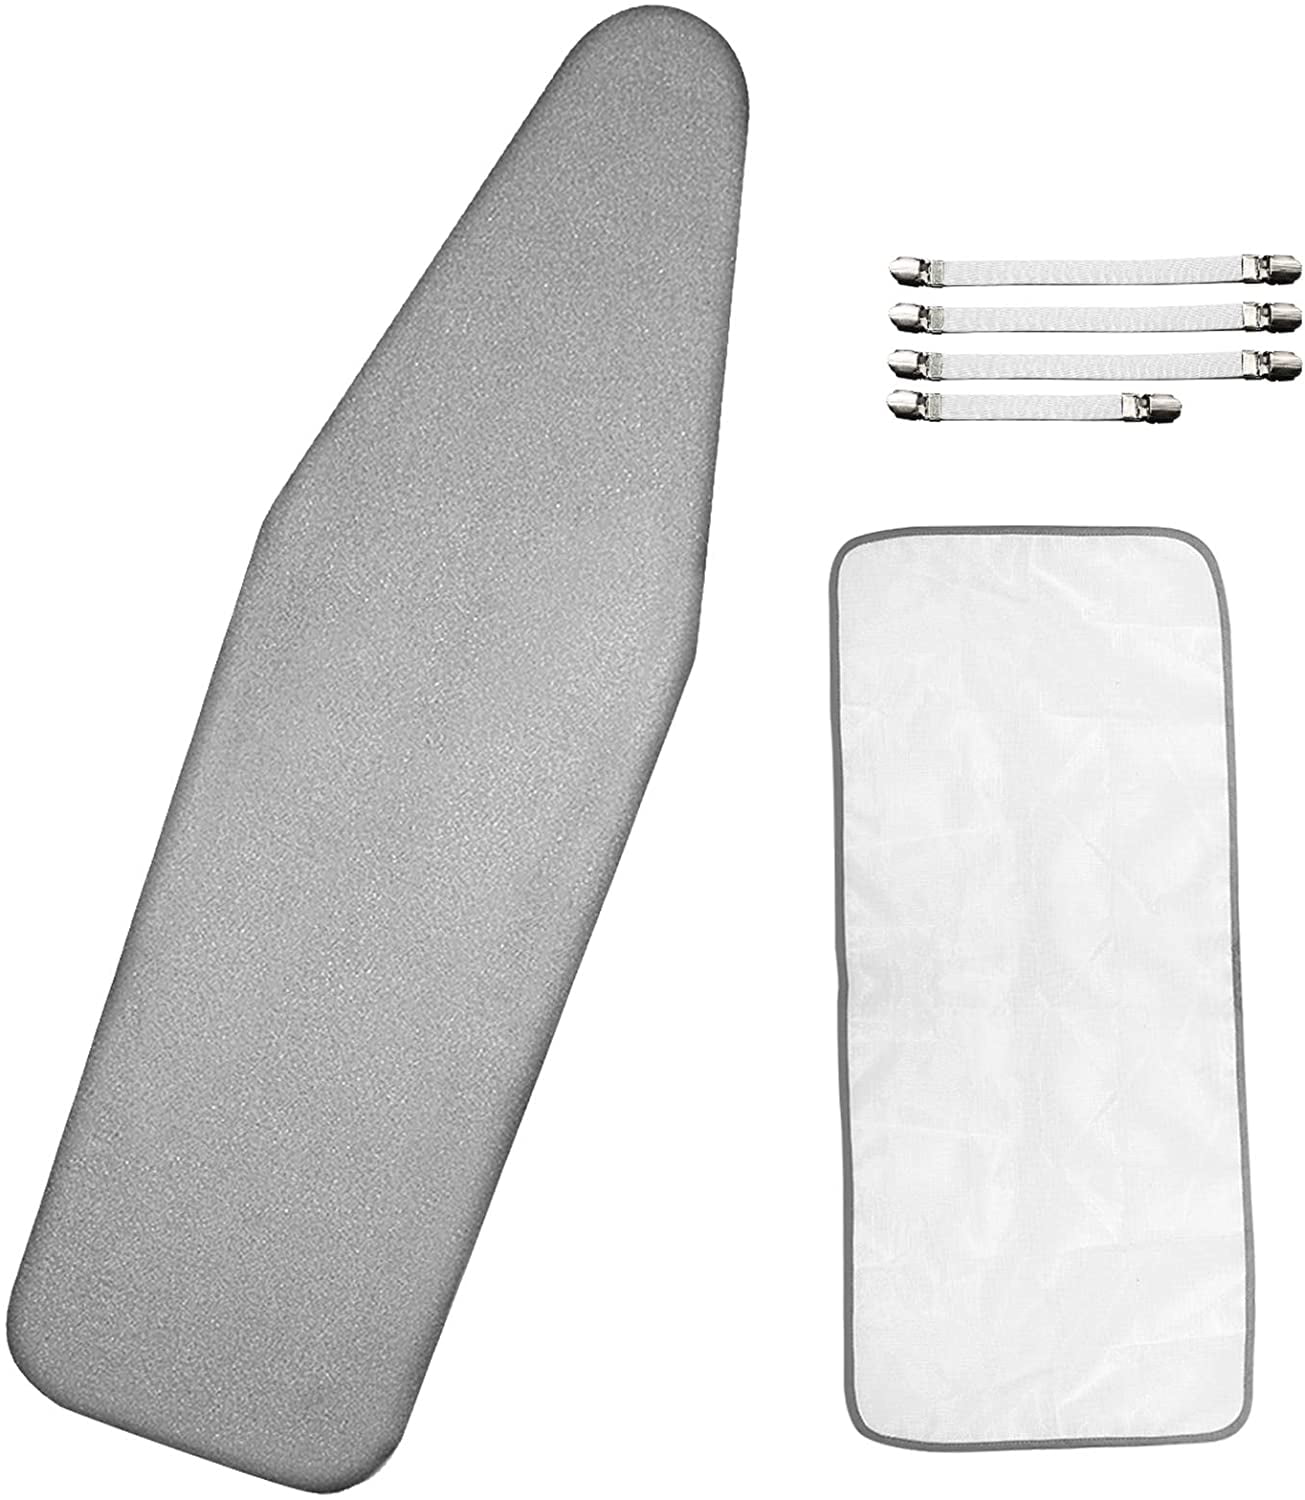 scorch resistant coating 13" x 32" ironing board cover Metallic heat-reflective 